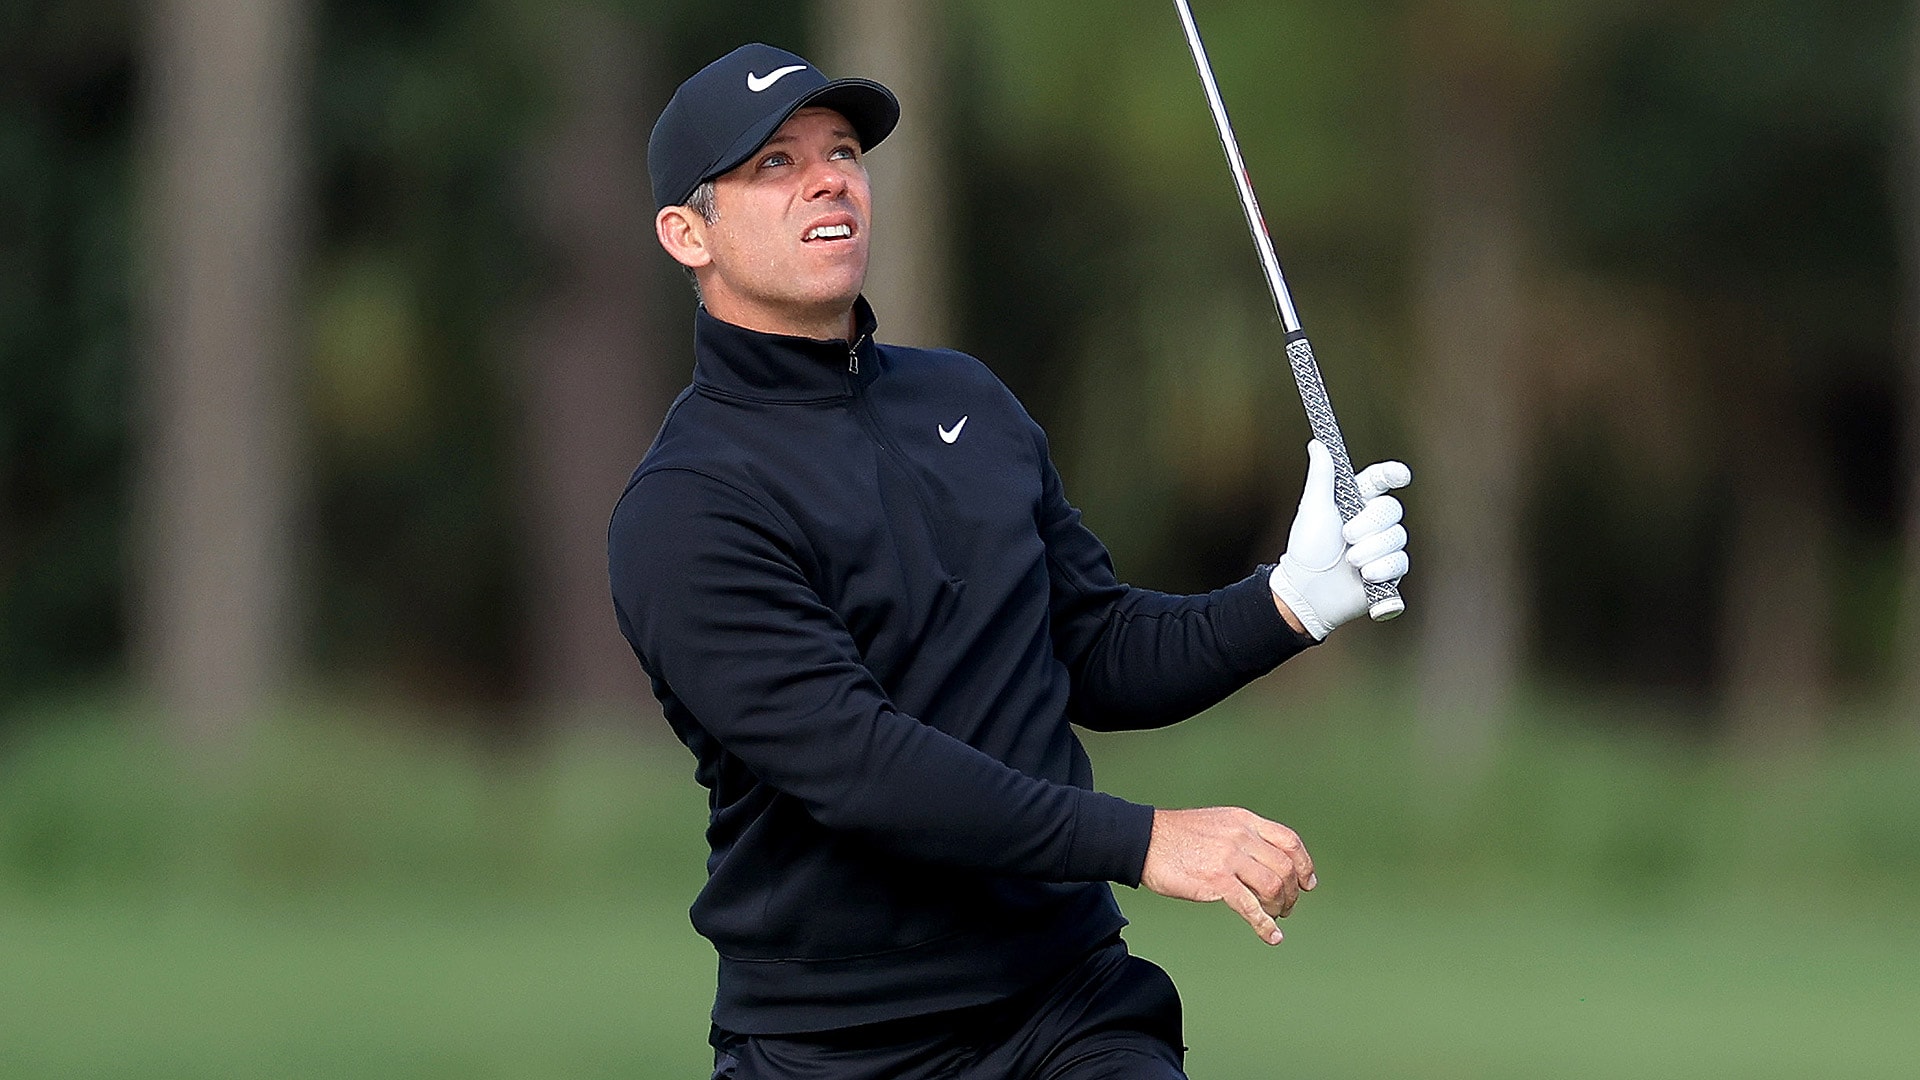 LIV commit Paul Casey back in 2019: ‘Sport is very political’